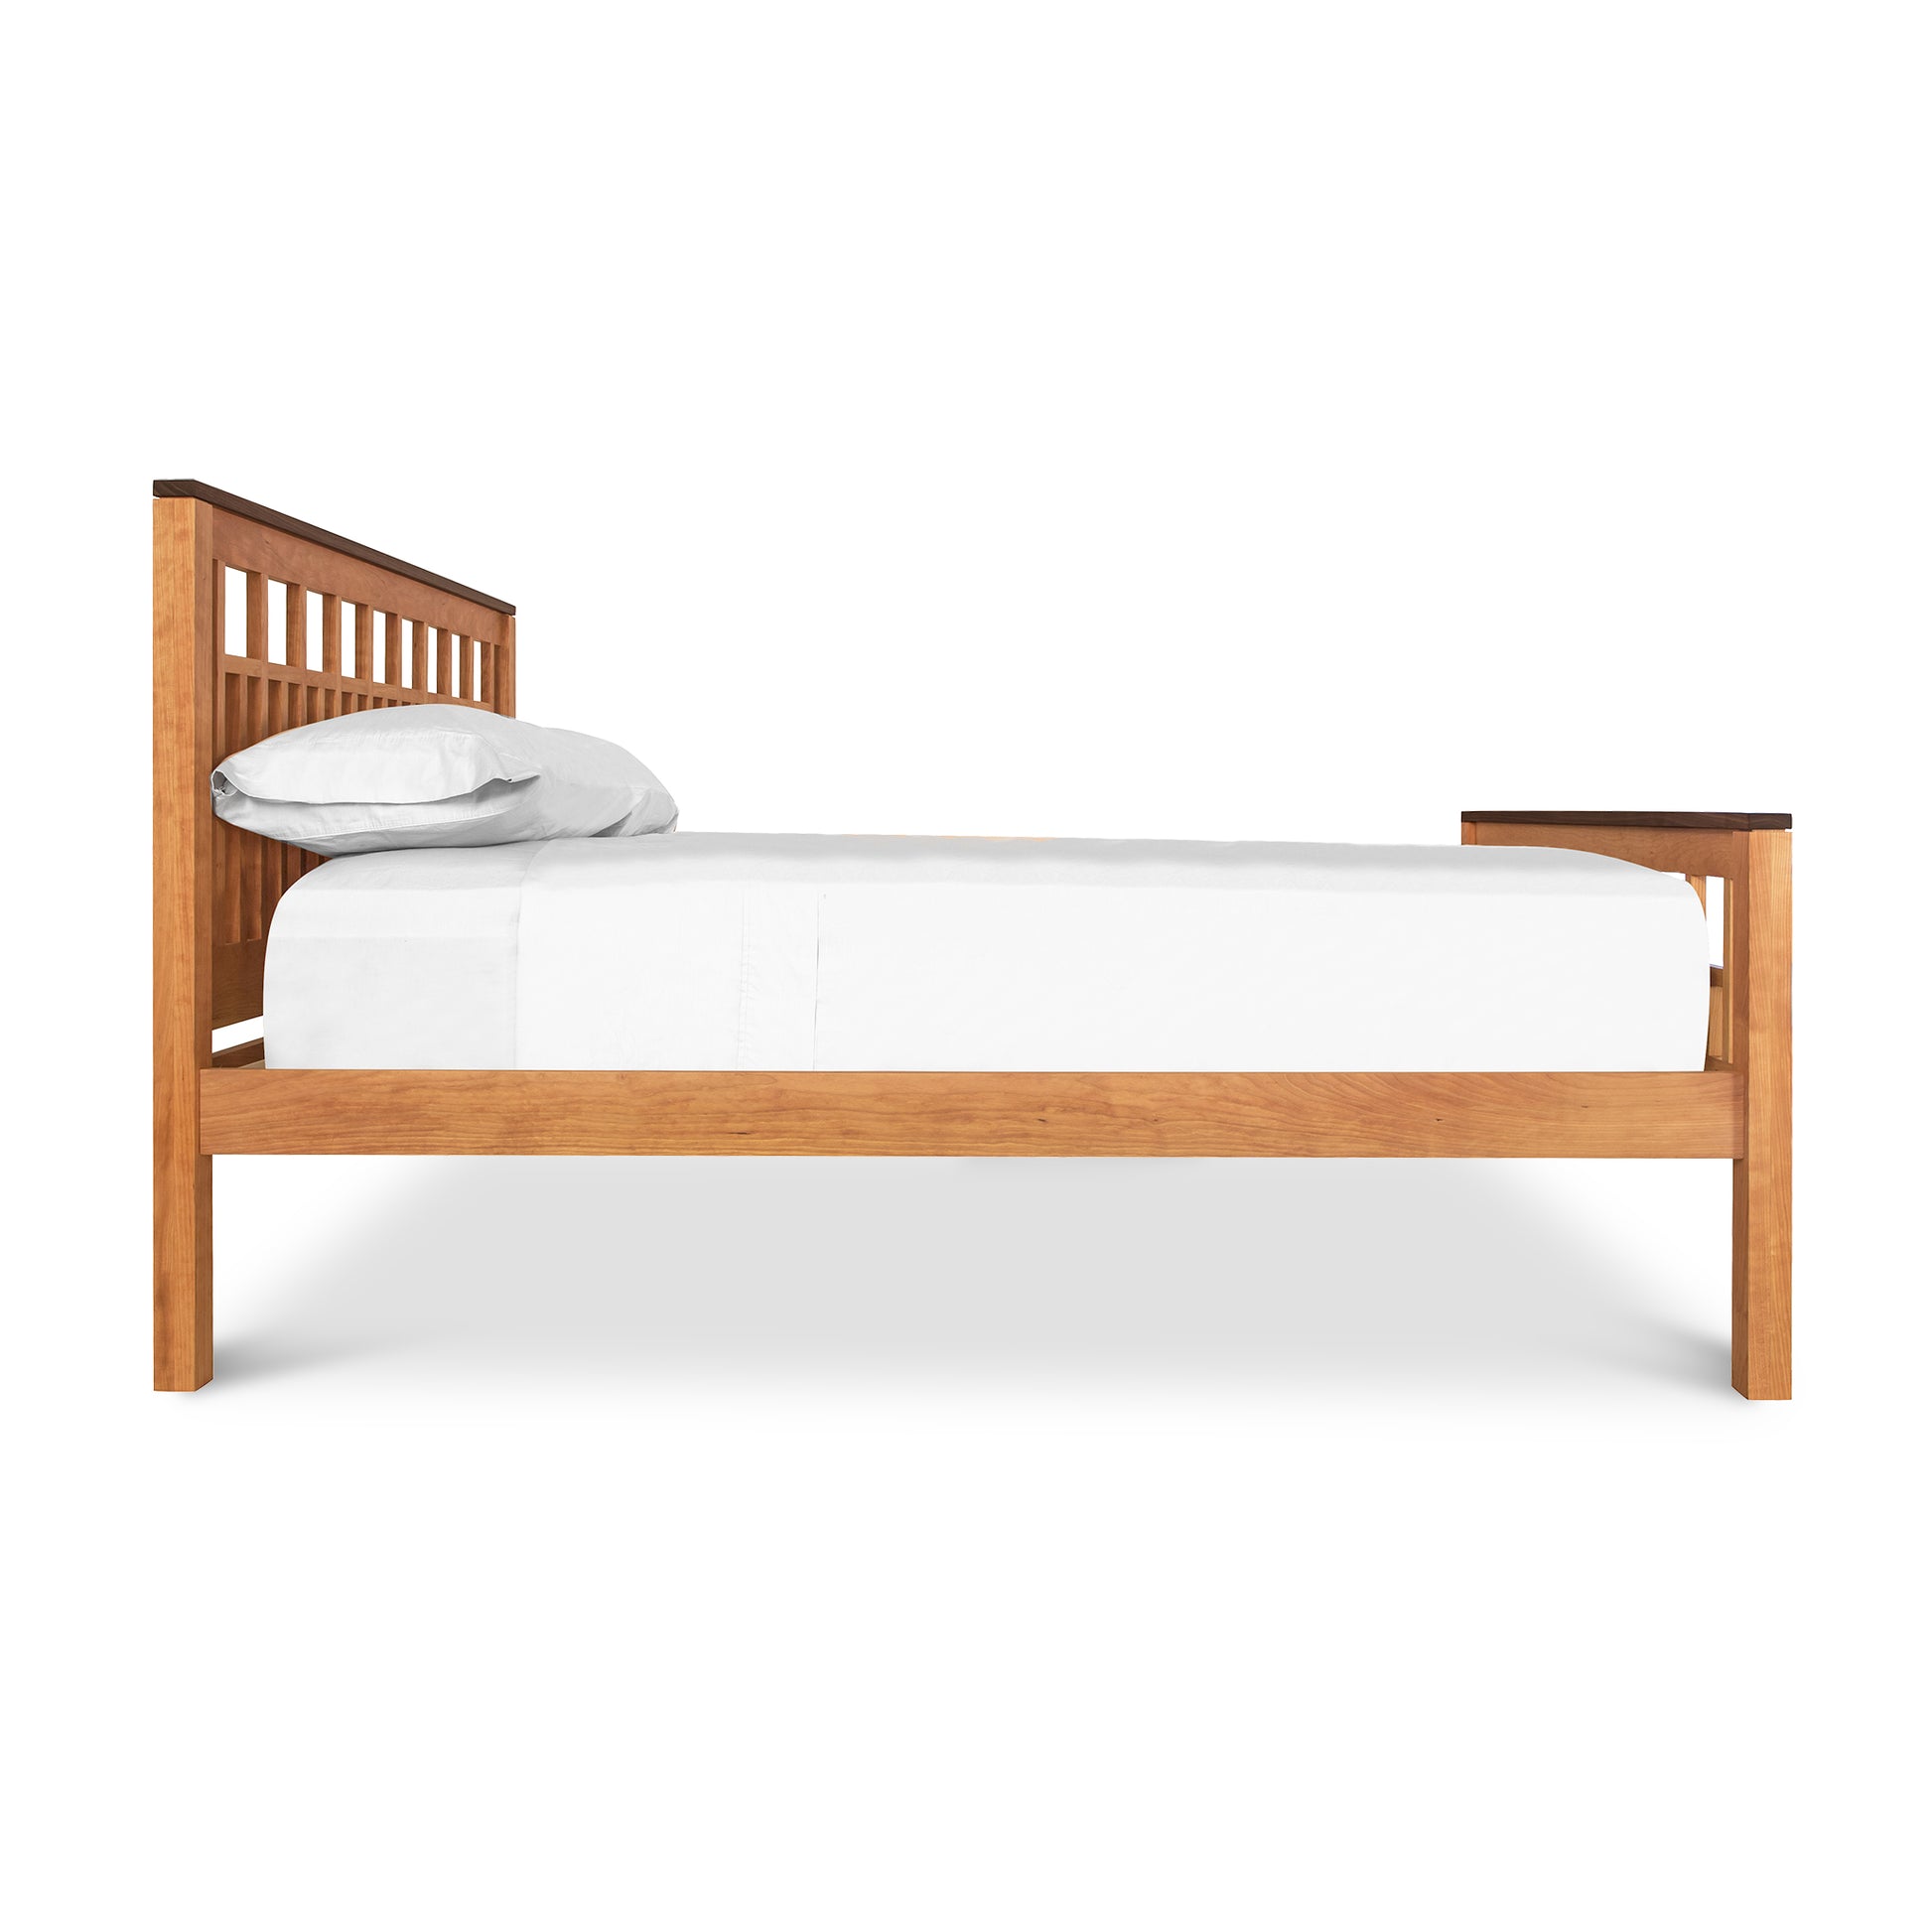 A high-end Modern American Trellis Bed by Vermont Furniture Designs with white sheets on it.